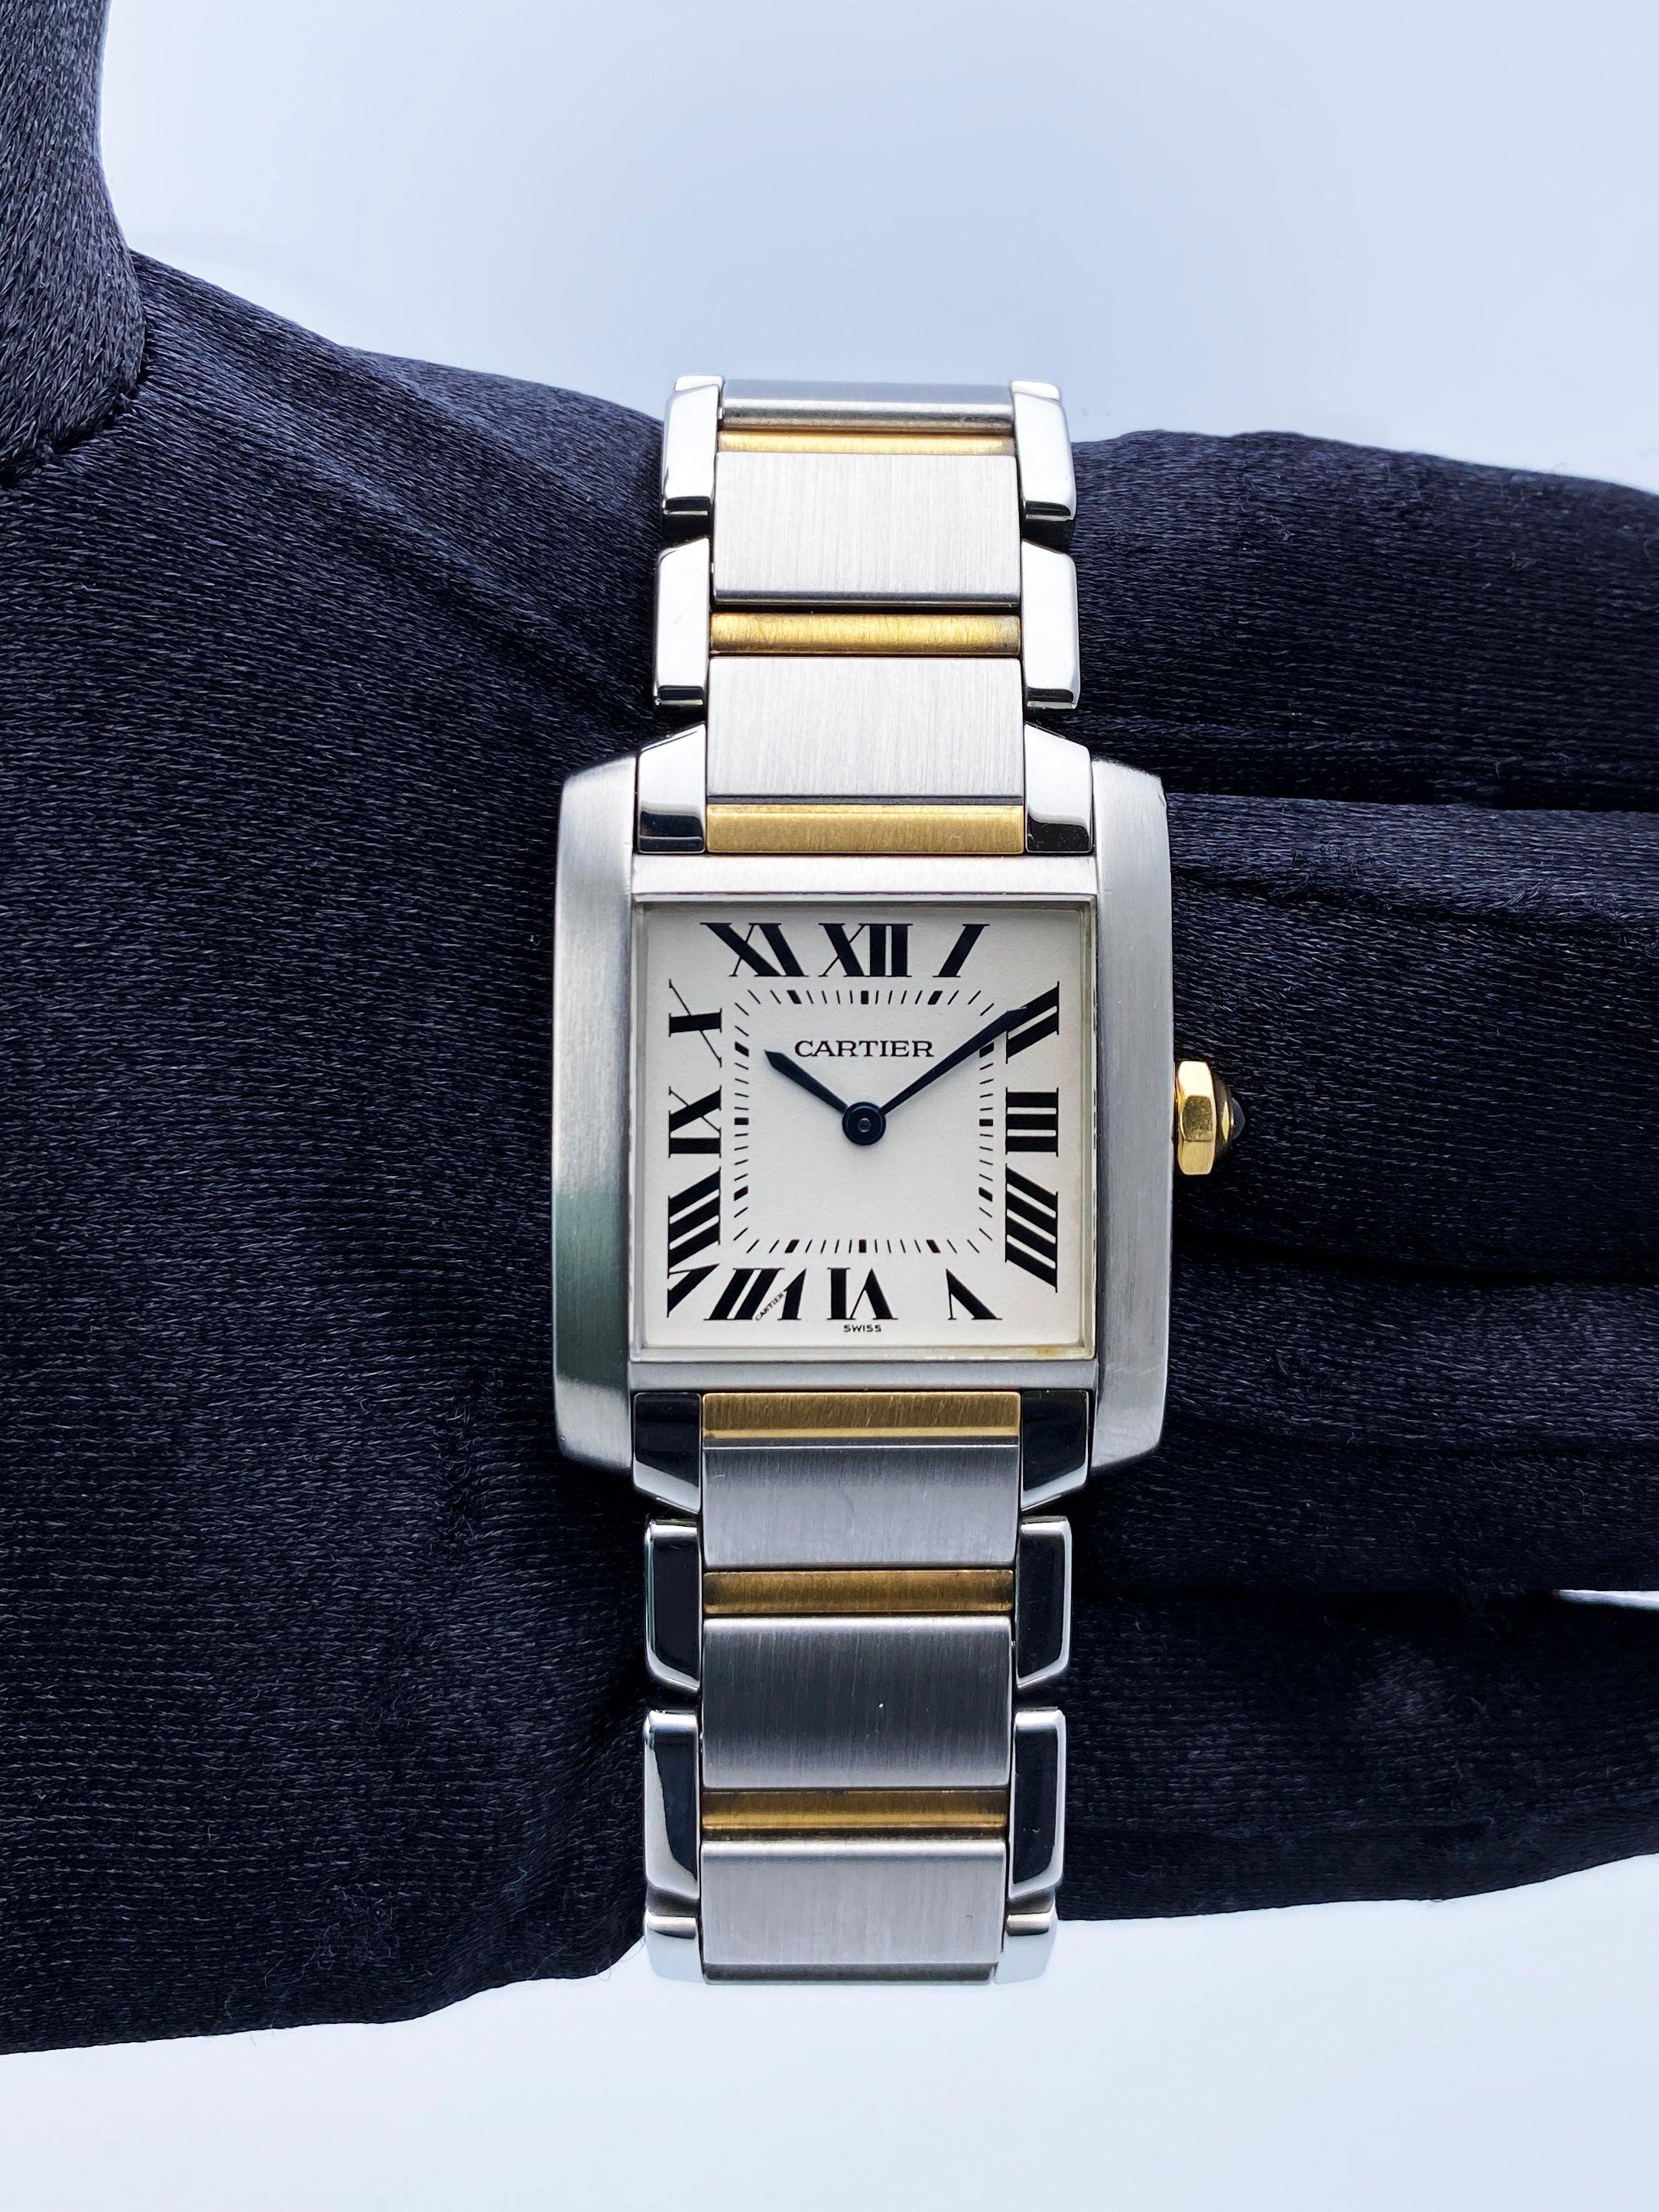 Cartier Tank Francaise 2301 Watch. 25mm stainless steel case with smooth bezel. Off-White dial with blue steel hands and black Roman numeral hour markers. Minute markers on the inner dial. 18K yellow gold & stainless steel bracelet with stainless